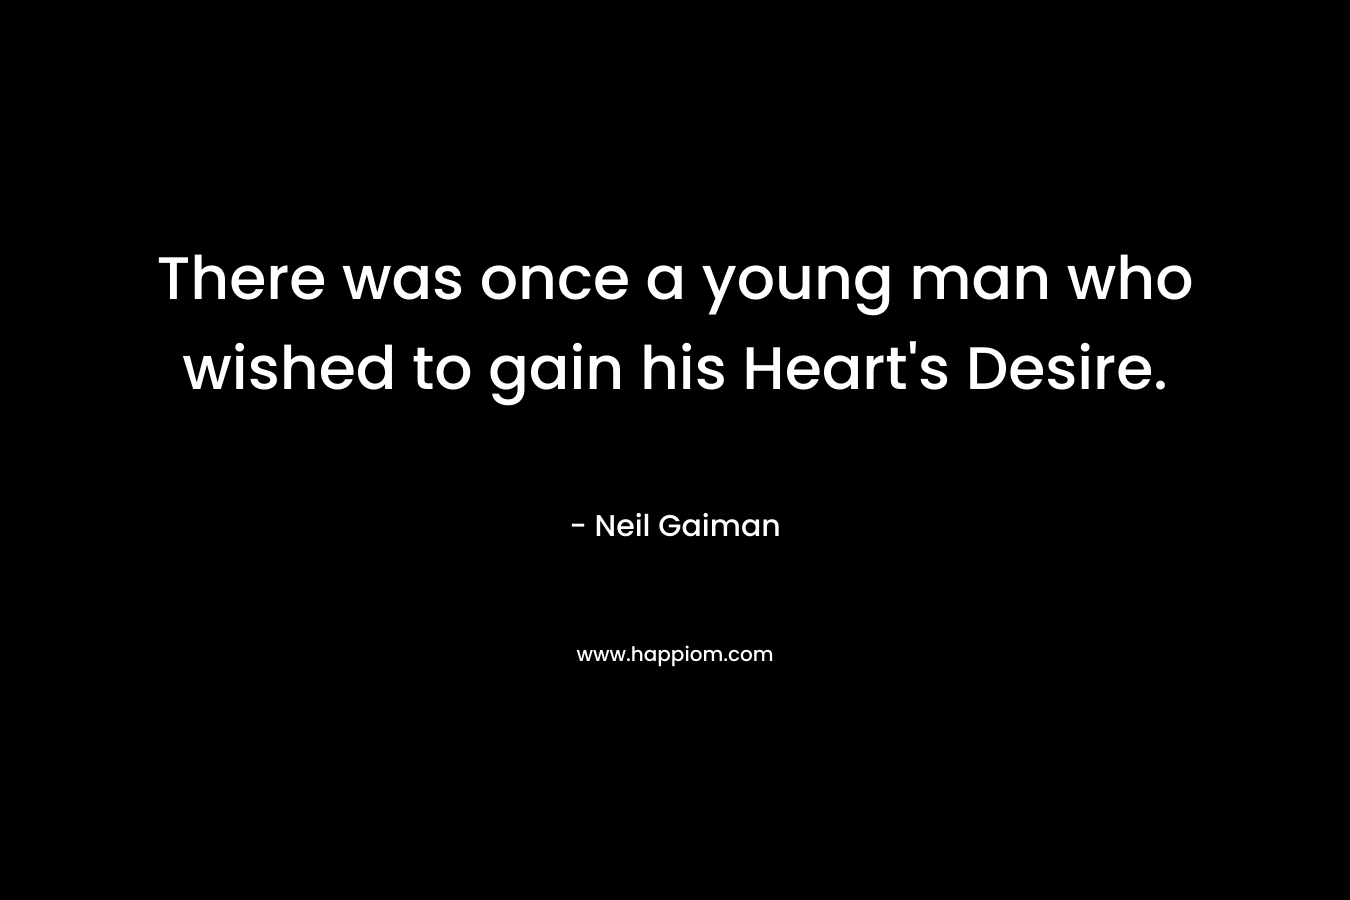 There was once a young man who wished to gain his Heart's Desire.